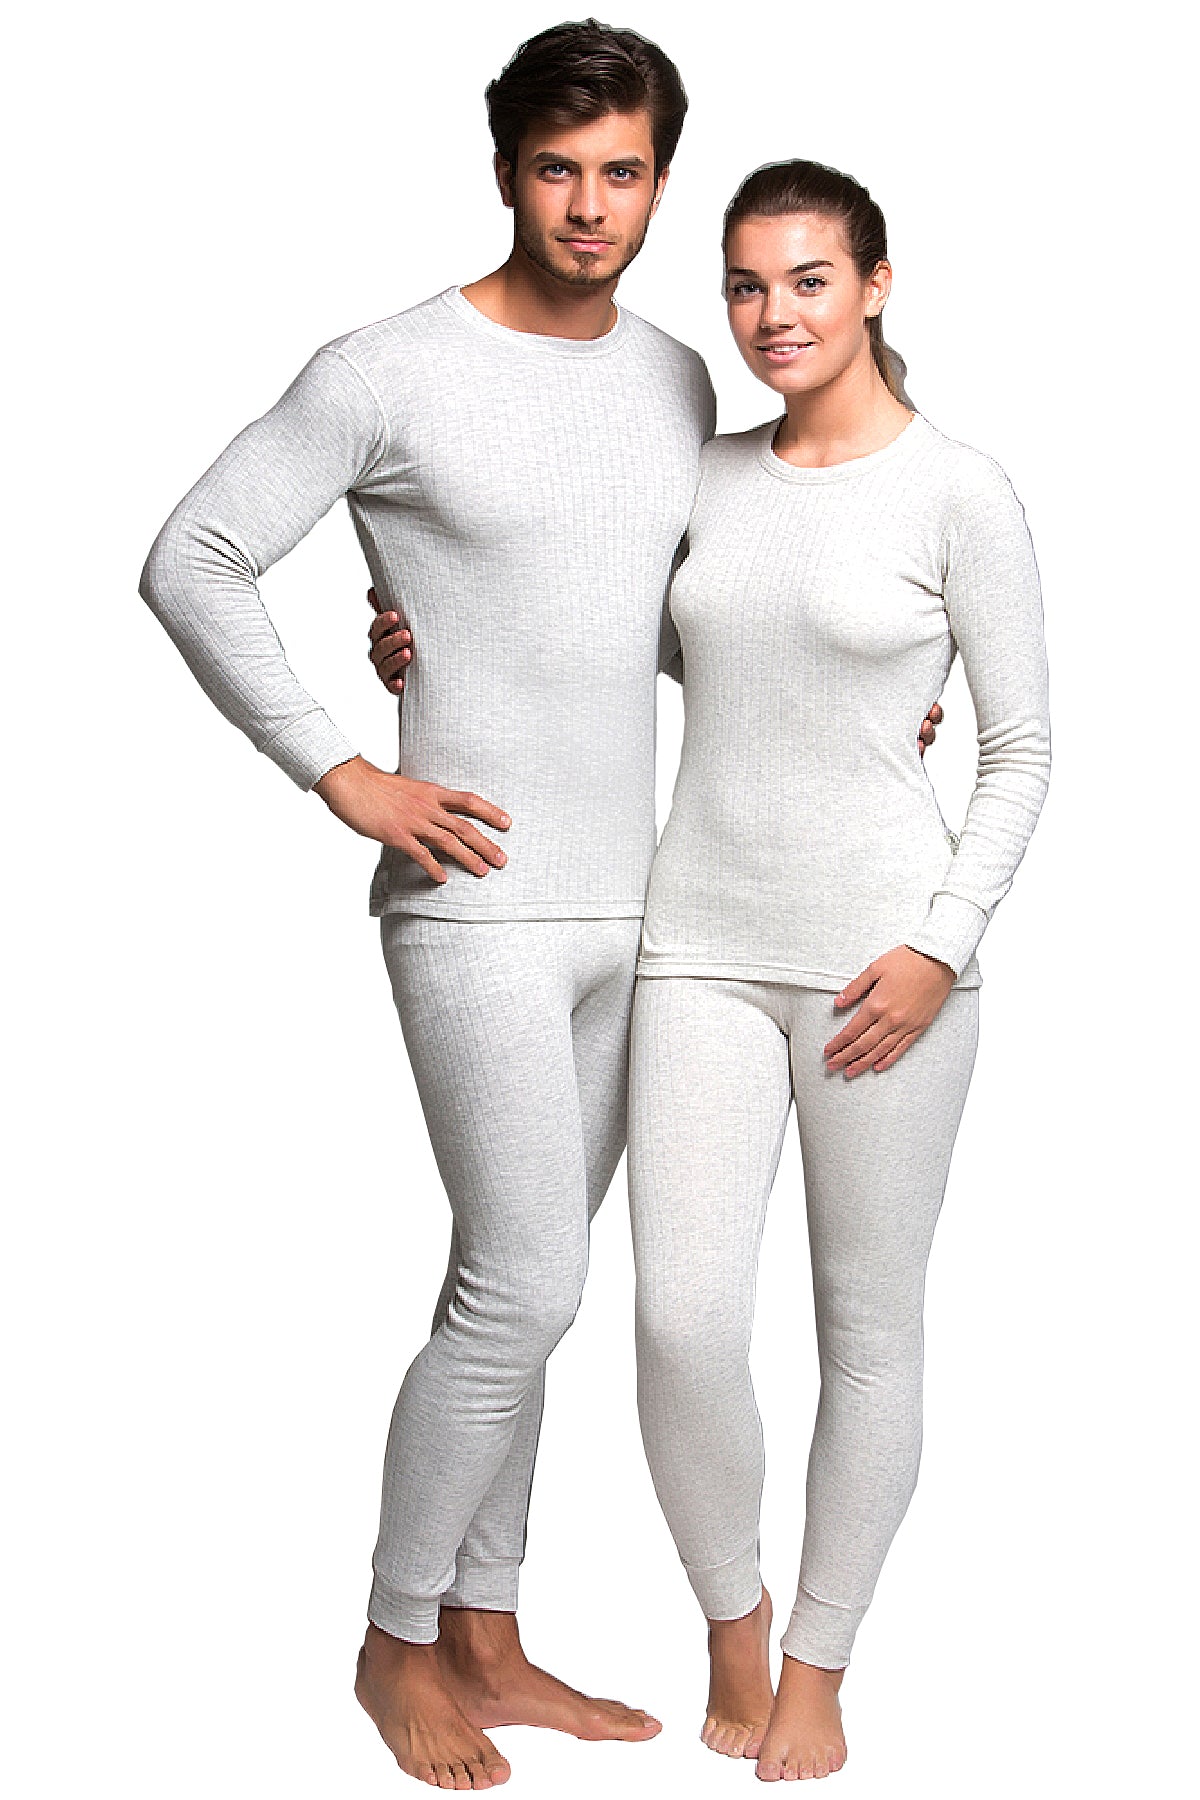 Wholesale Thermal Underwear, Private Label Thermal Sets